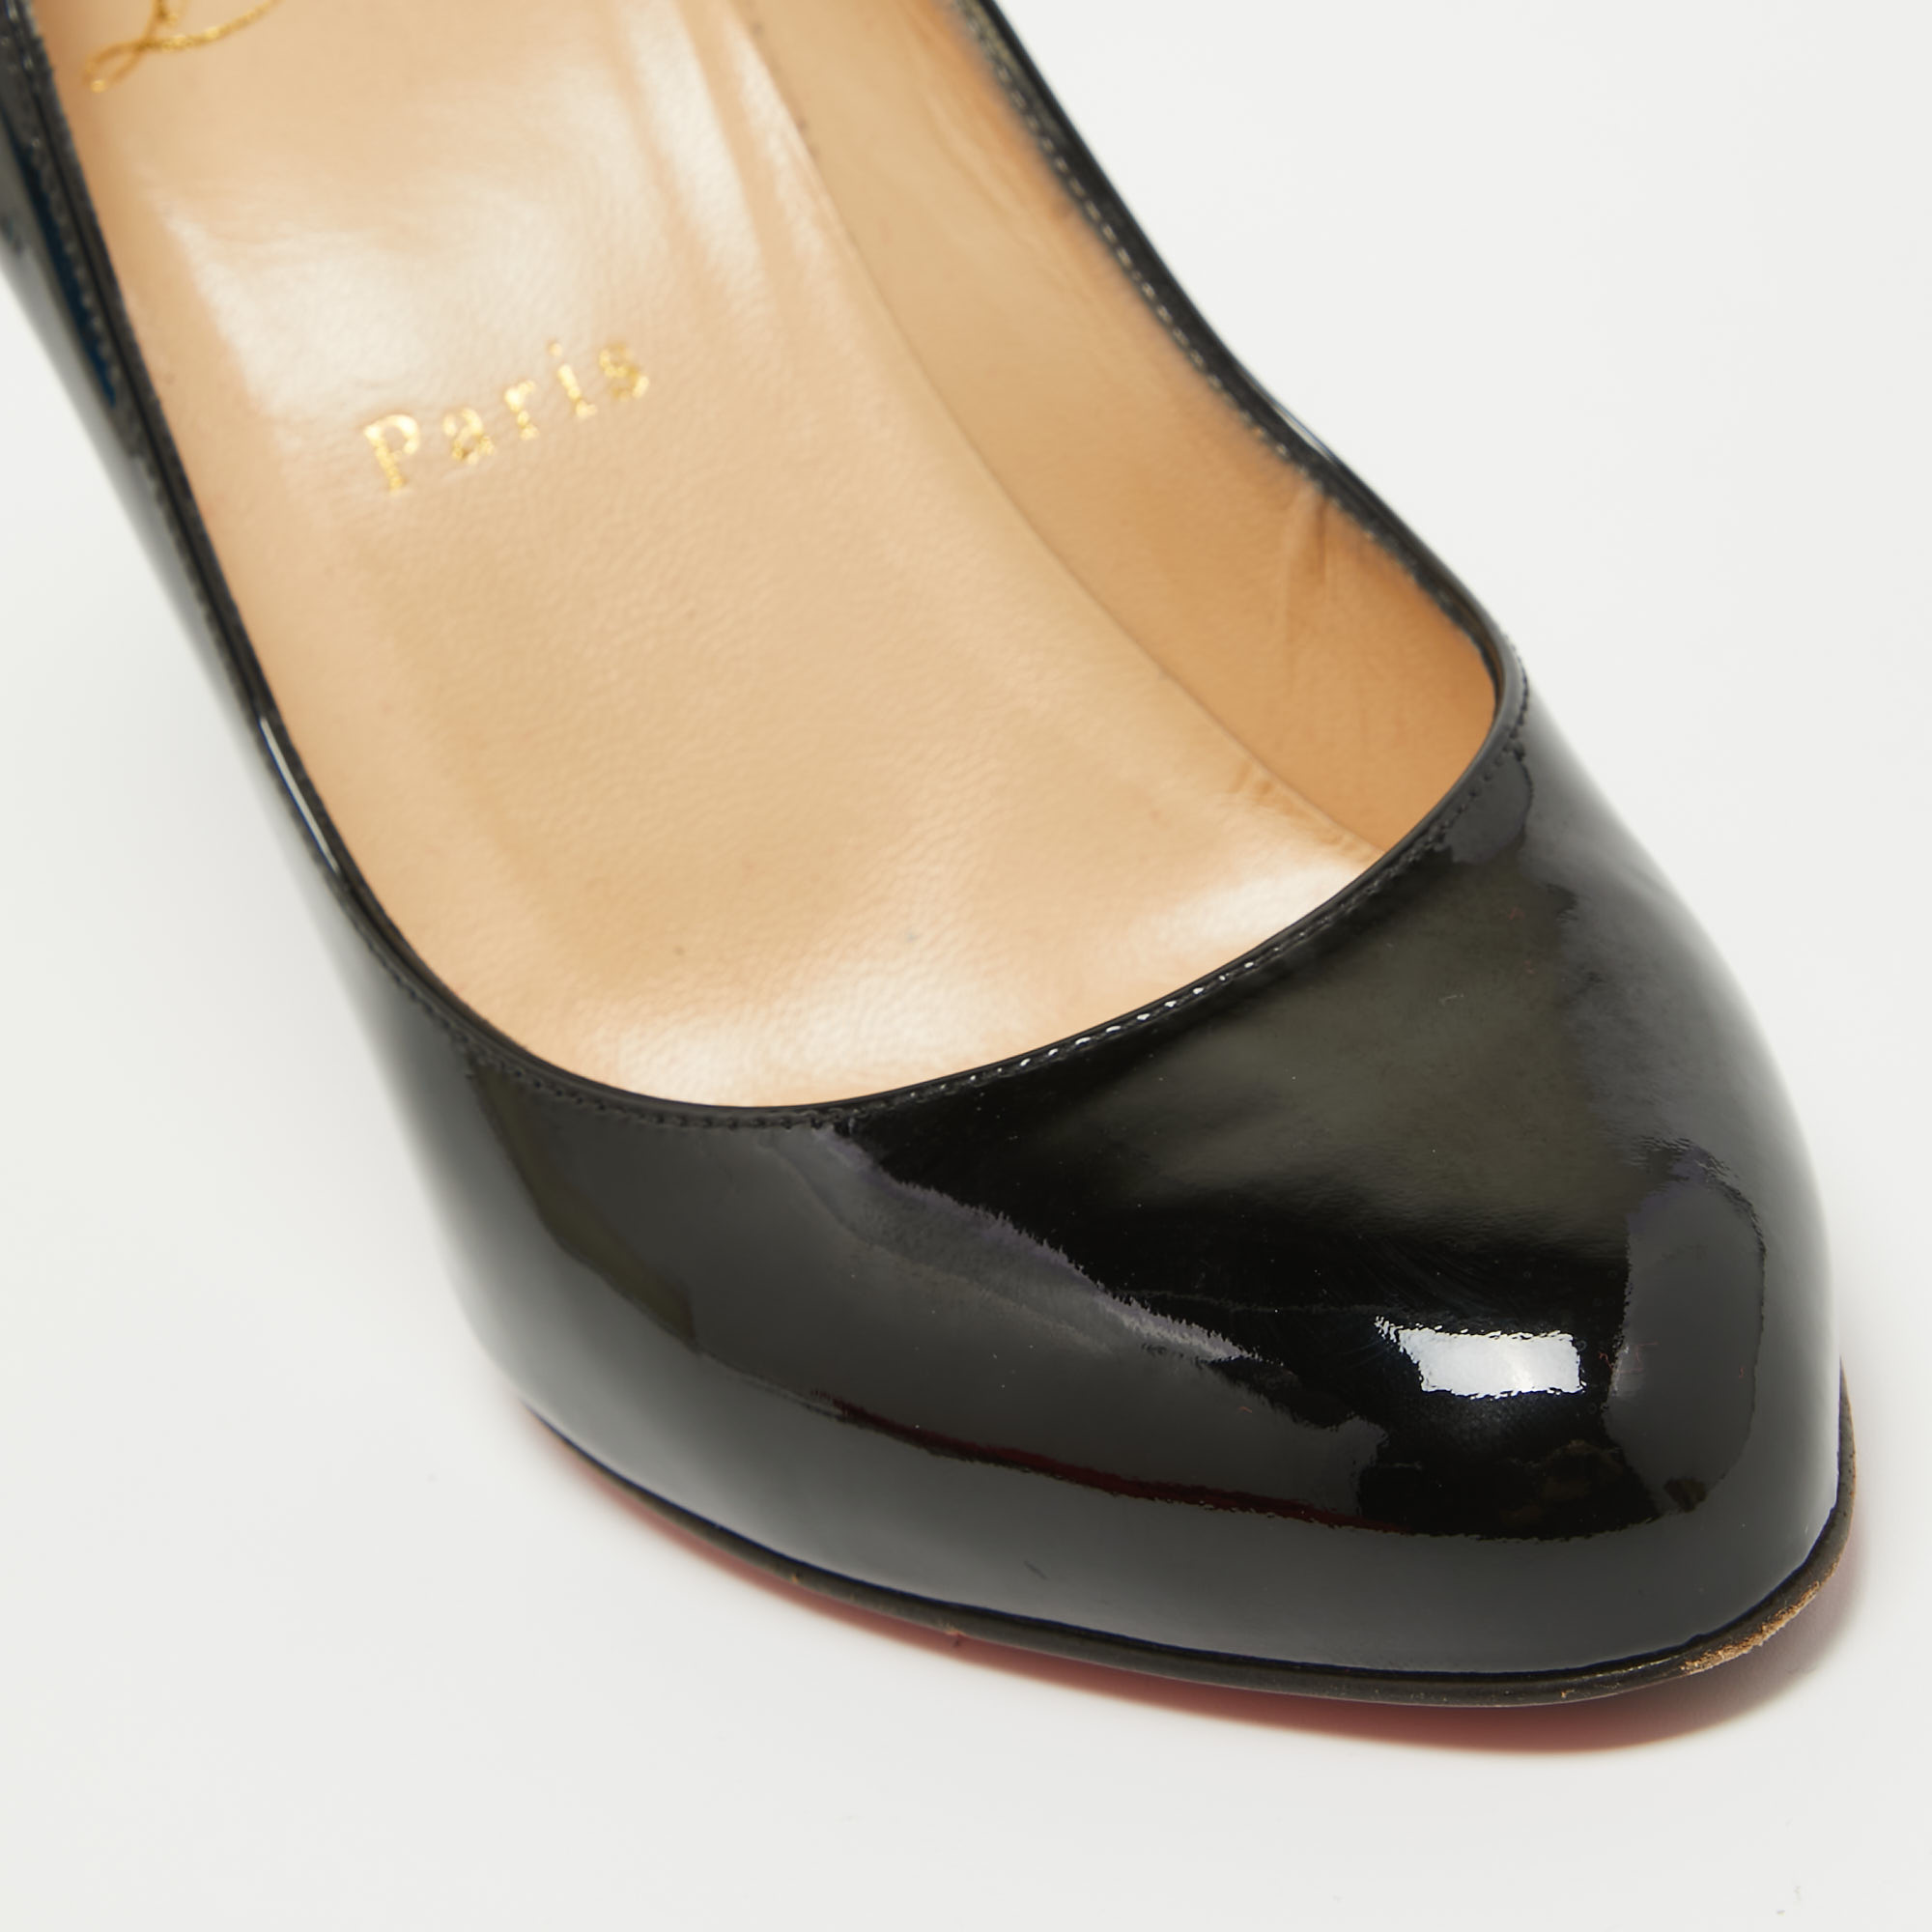 Christian Louboutin Black Patent Leather Dolly Pumps Size 37